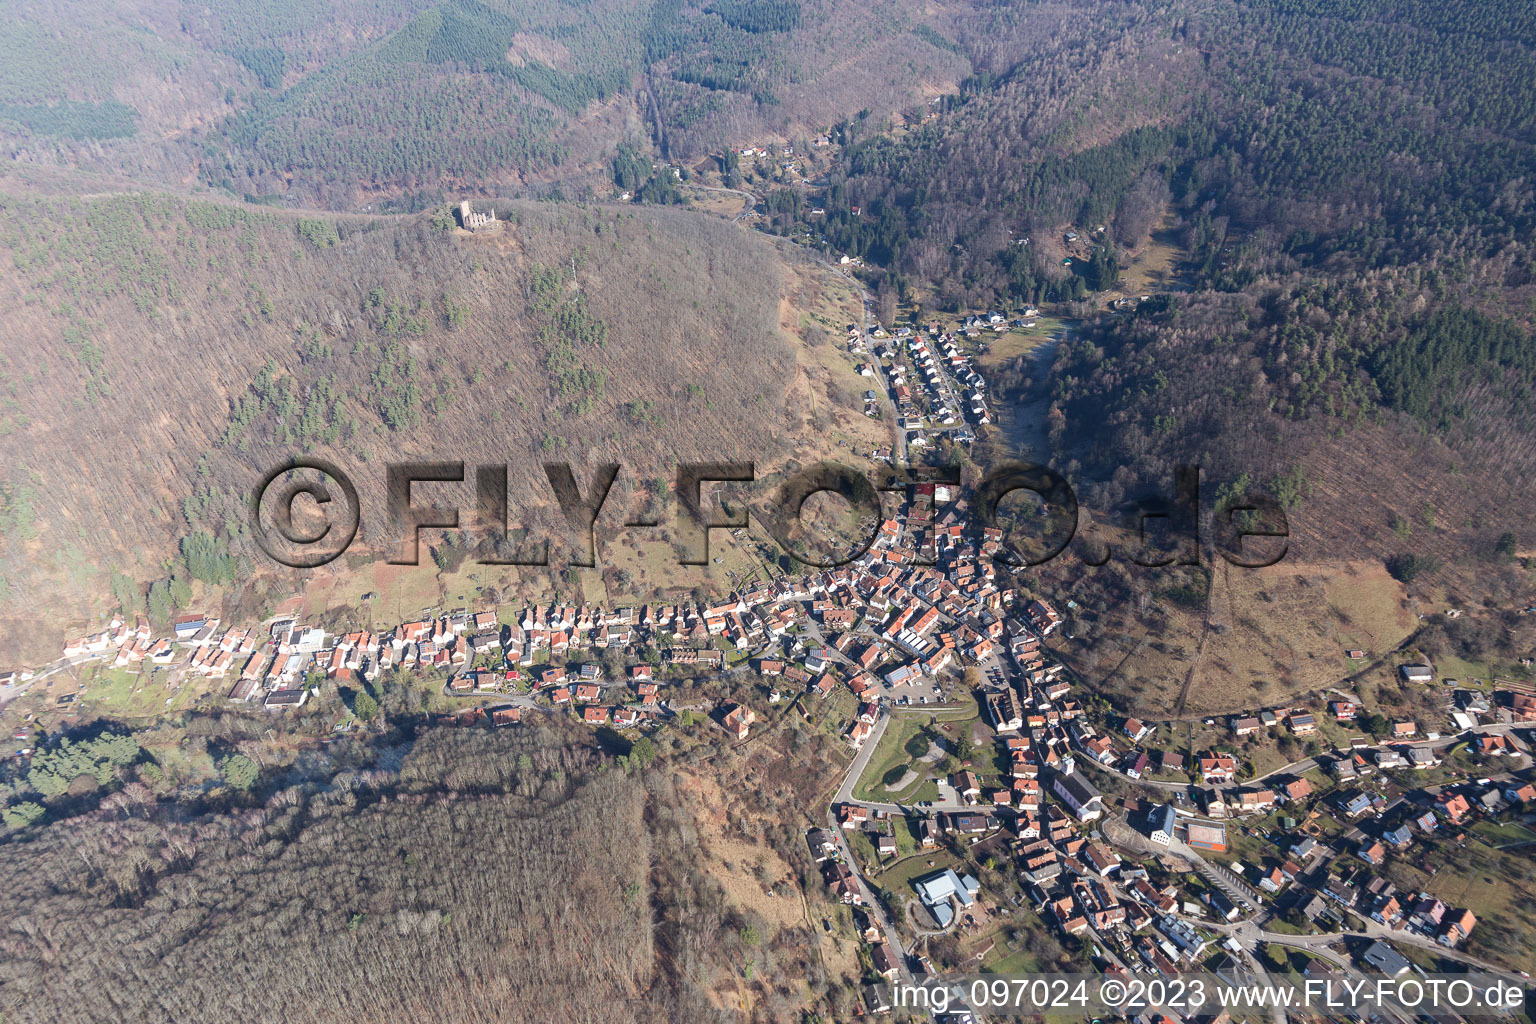 Ramberg in the state Rhineland-Palatinate, Germany from the drone perspective